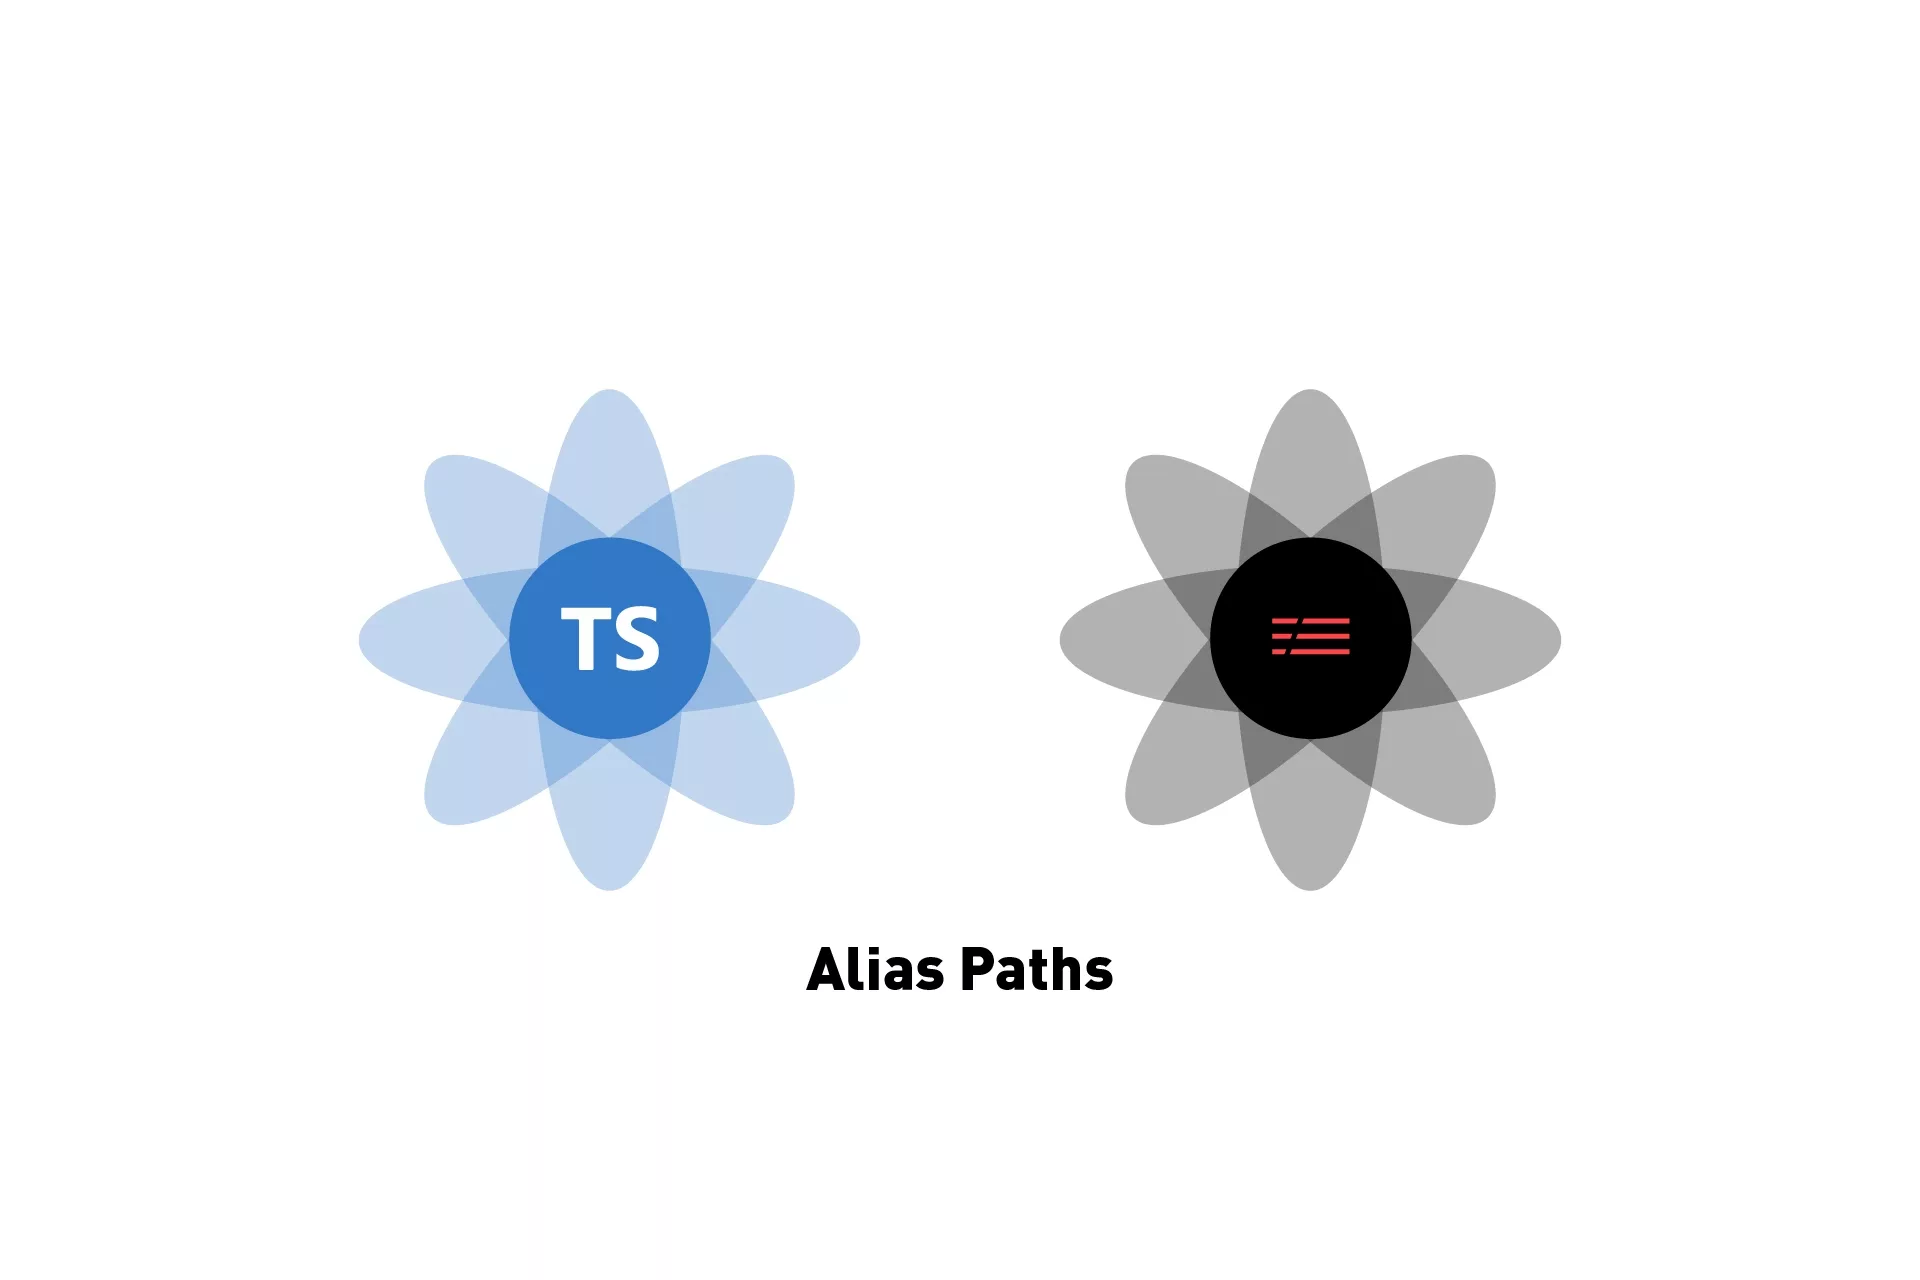 A flower that represents Typescript next to one that represents Serverless. Below it sits the text "Alias Paths".